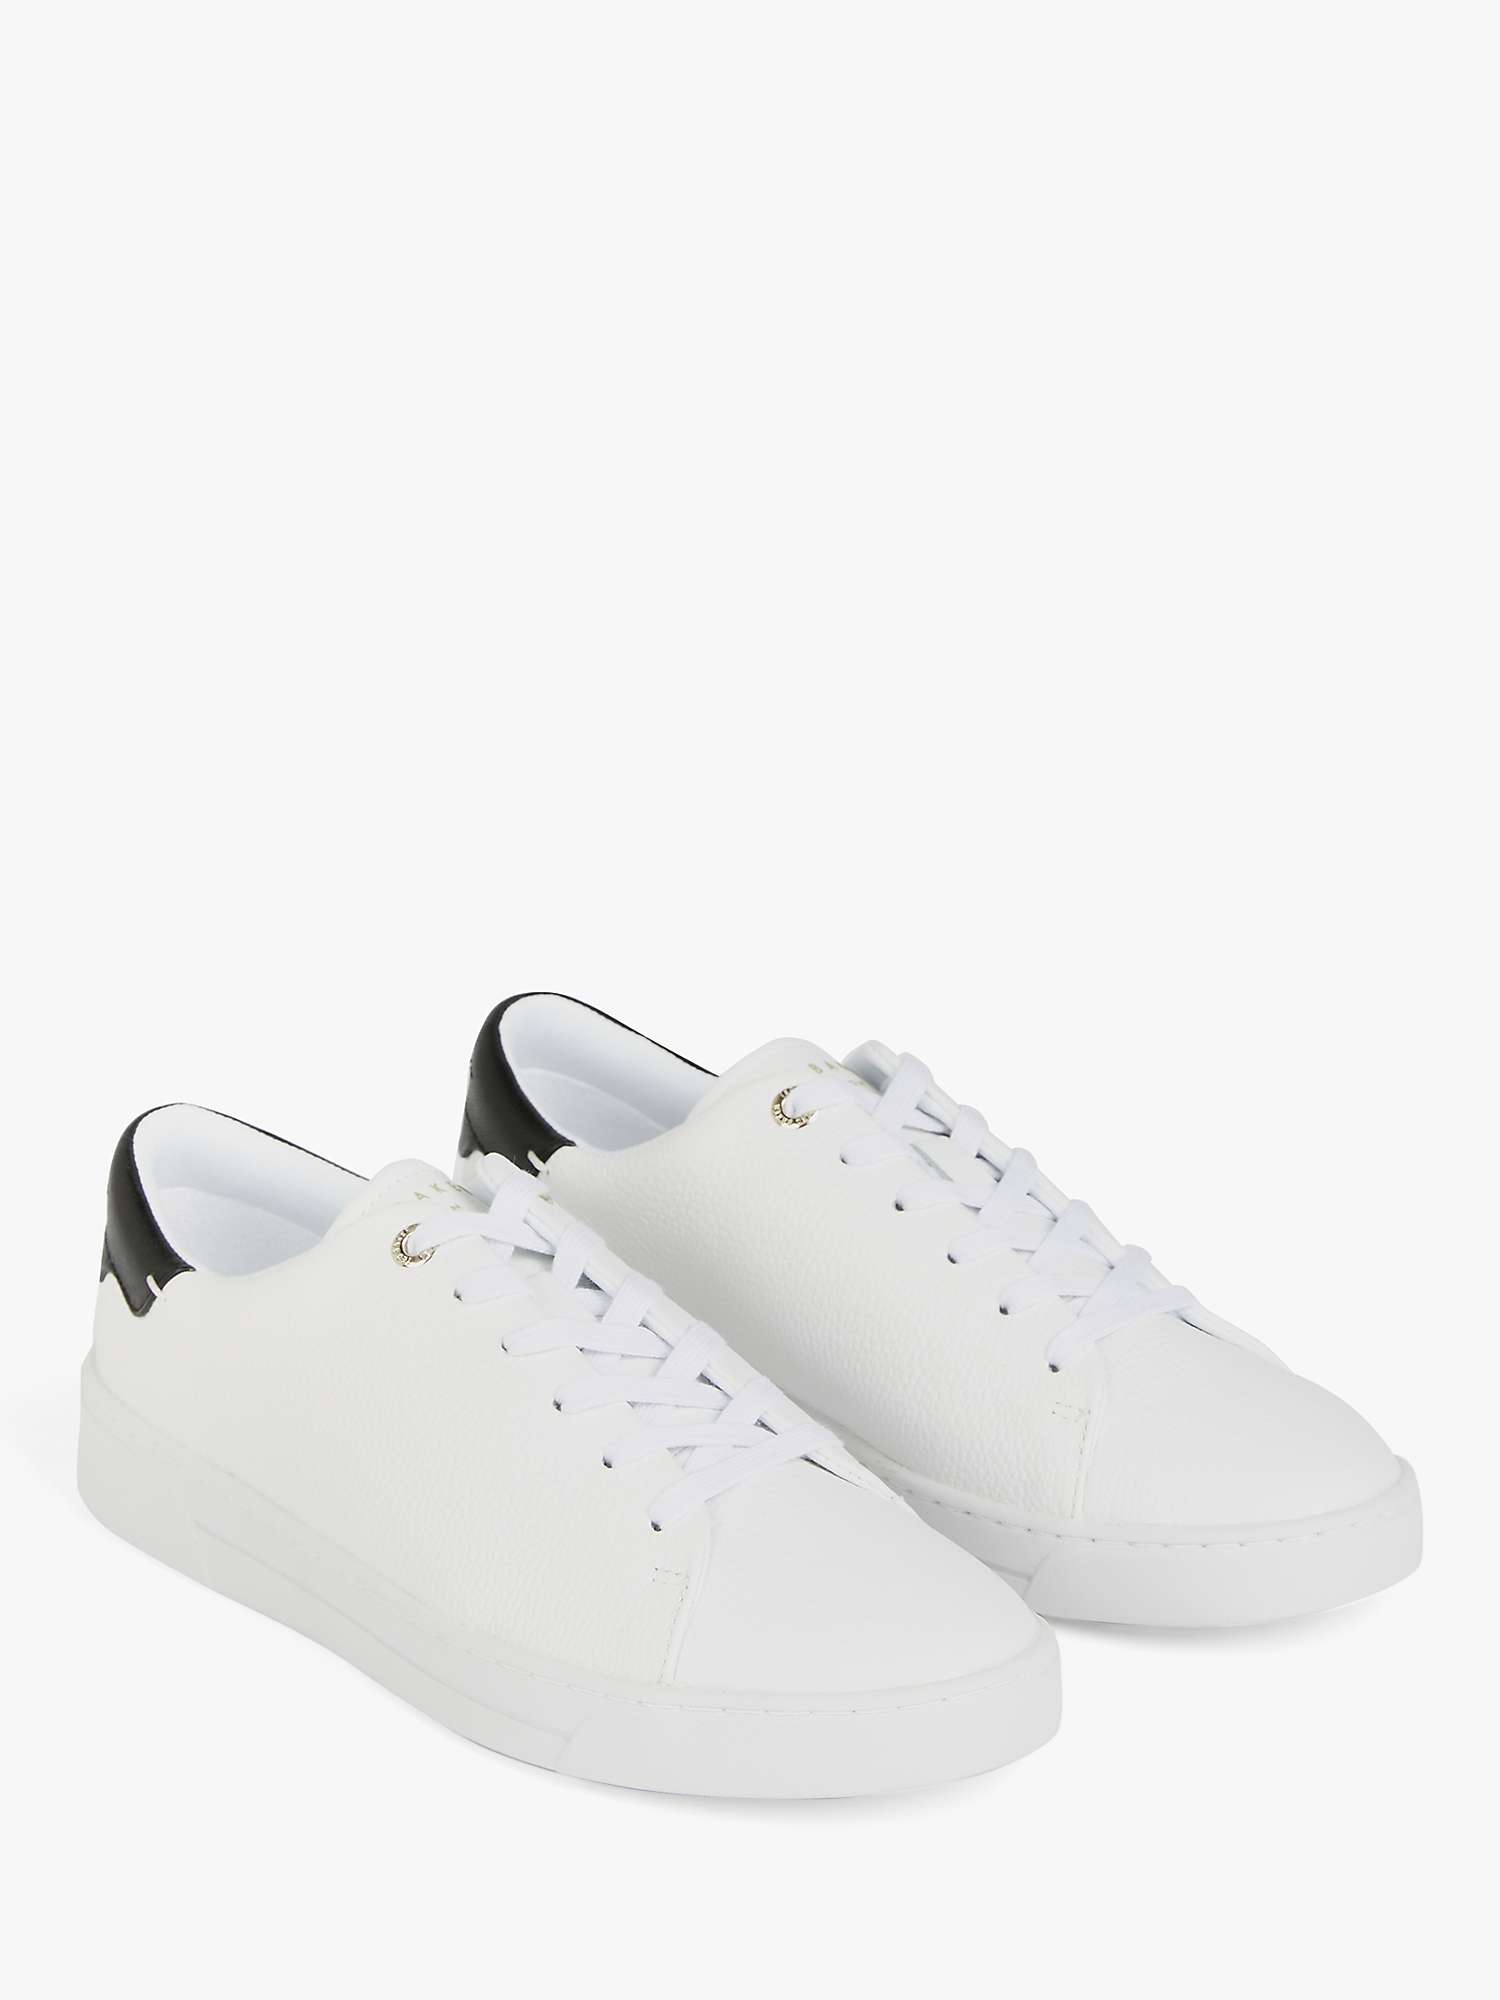 Ted Baker Tumbled Leather Low Top Trainers, White/Black at John Lewis ...